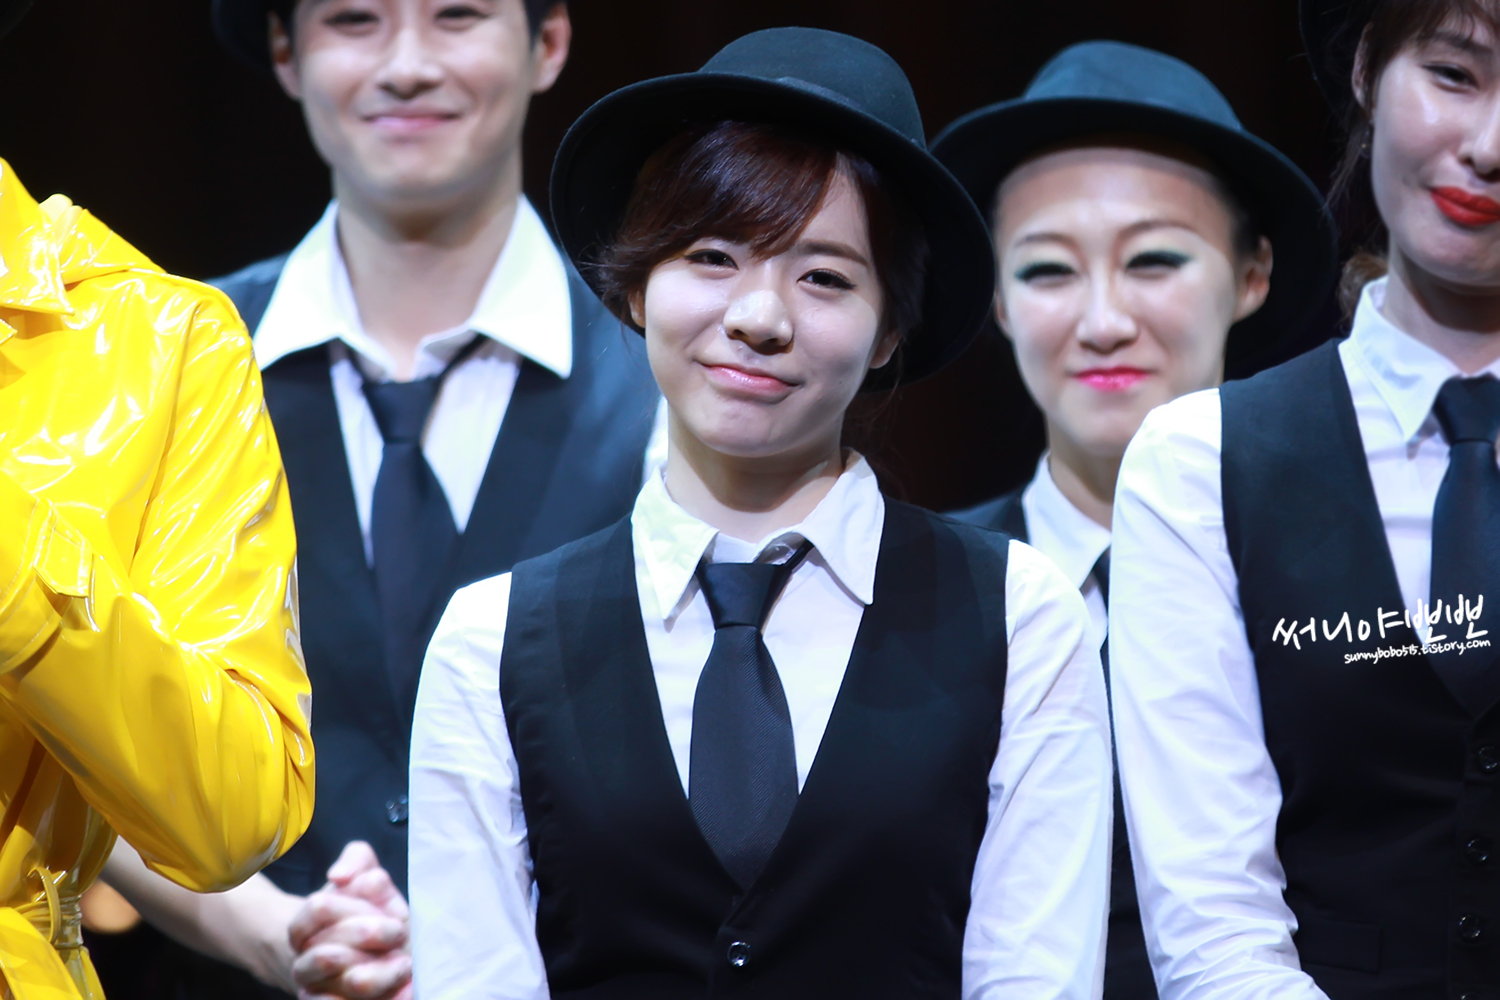 [OTHER][29-04-2014]Sunny sẽ tham gia vở nhạc kịch "SINGIN' IN THE RAIN" - Page 7 2370BF4B53EEDE9201482D